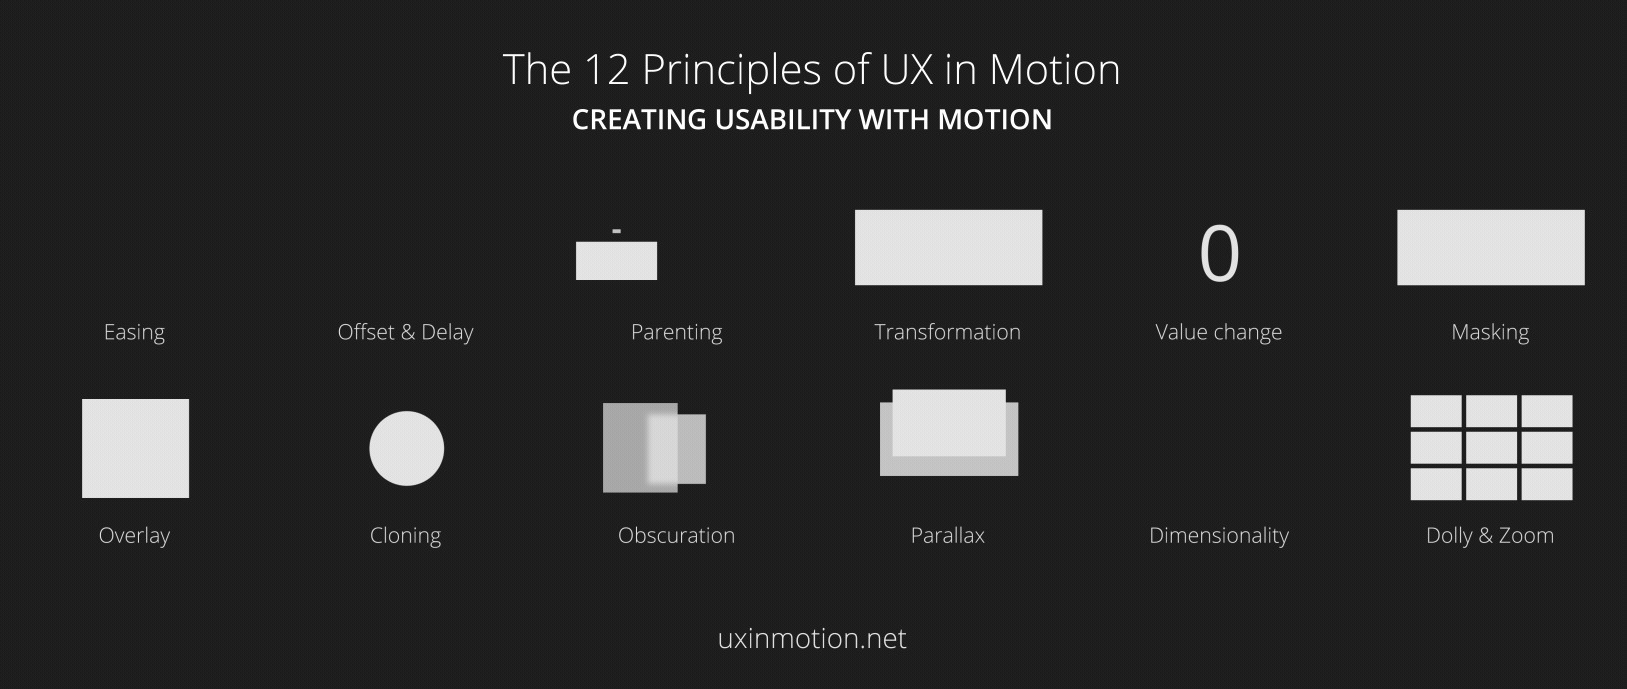 The design element of motion comes in many forms: quick, slow, and in all directions.